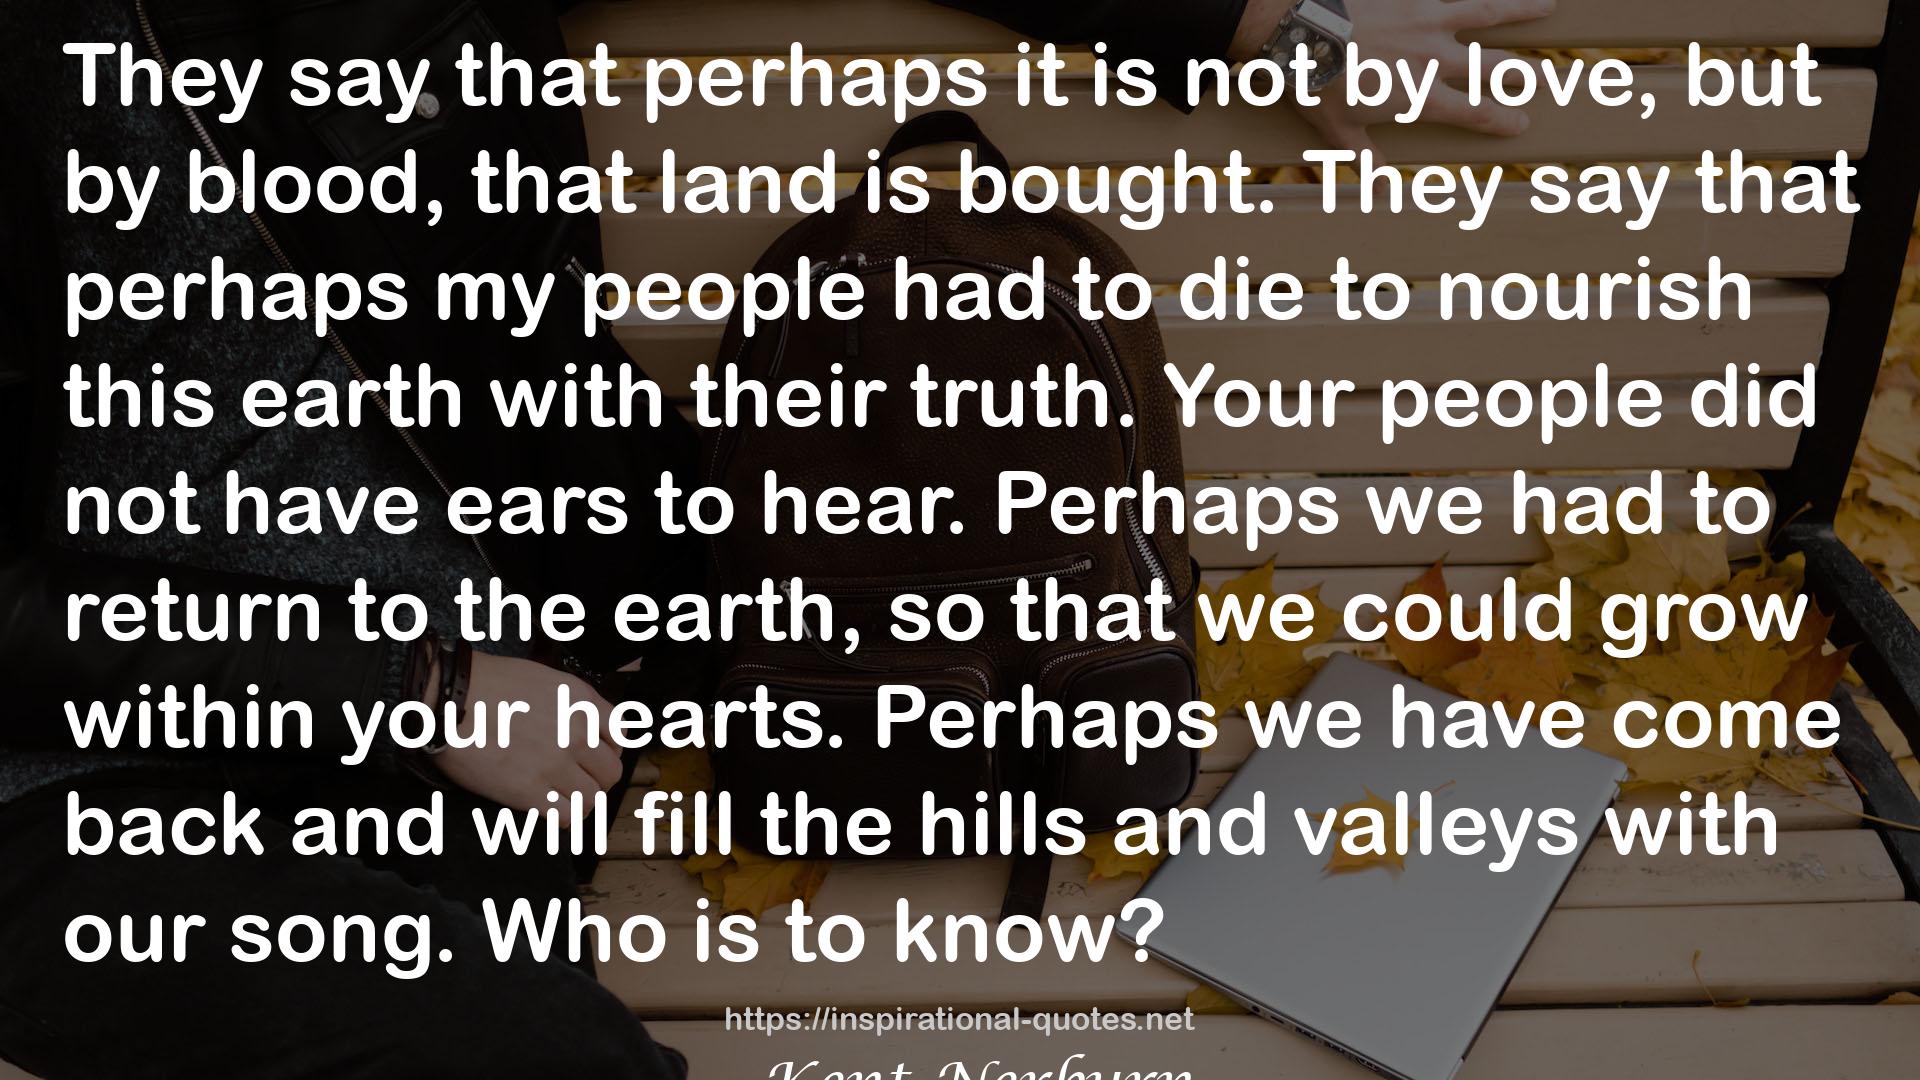 that land  QUOTES